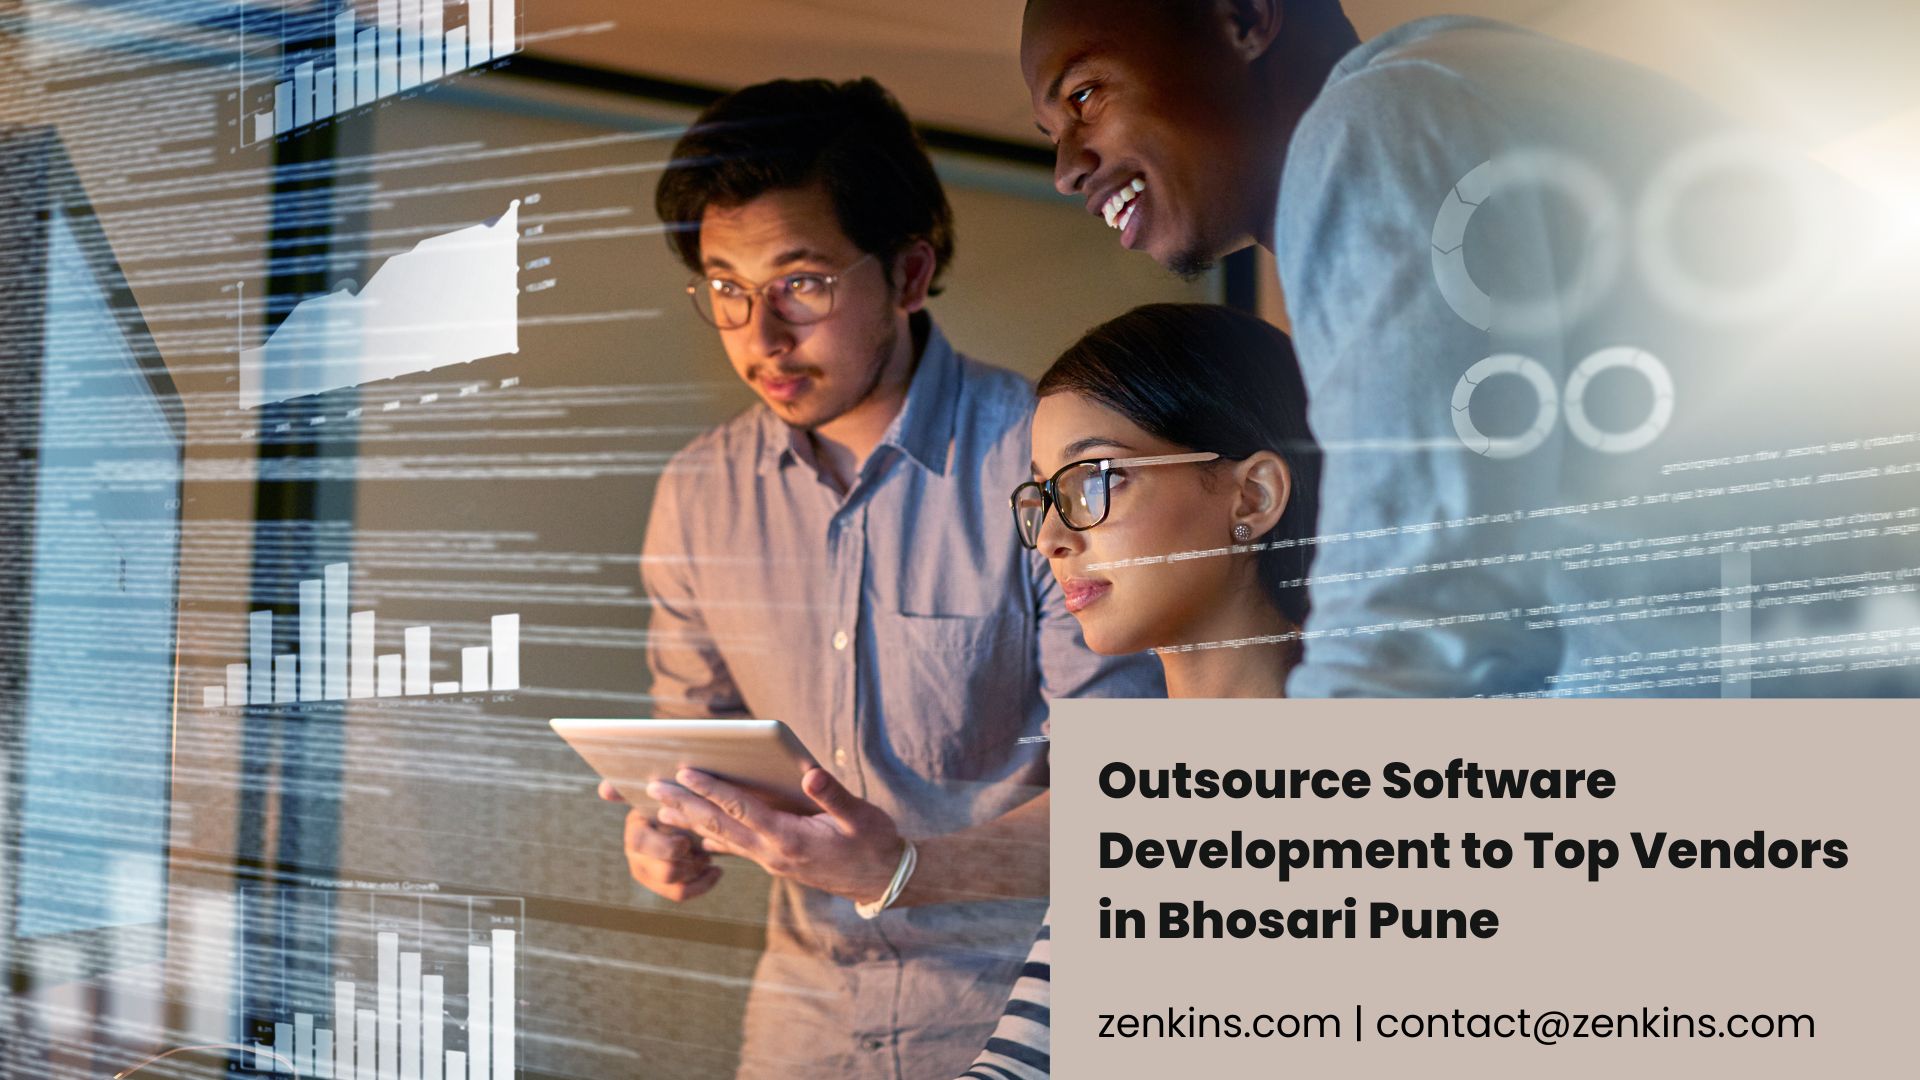 Outsource Software Development to Top Vendors in Bhosari Pune